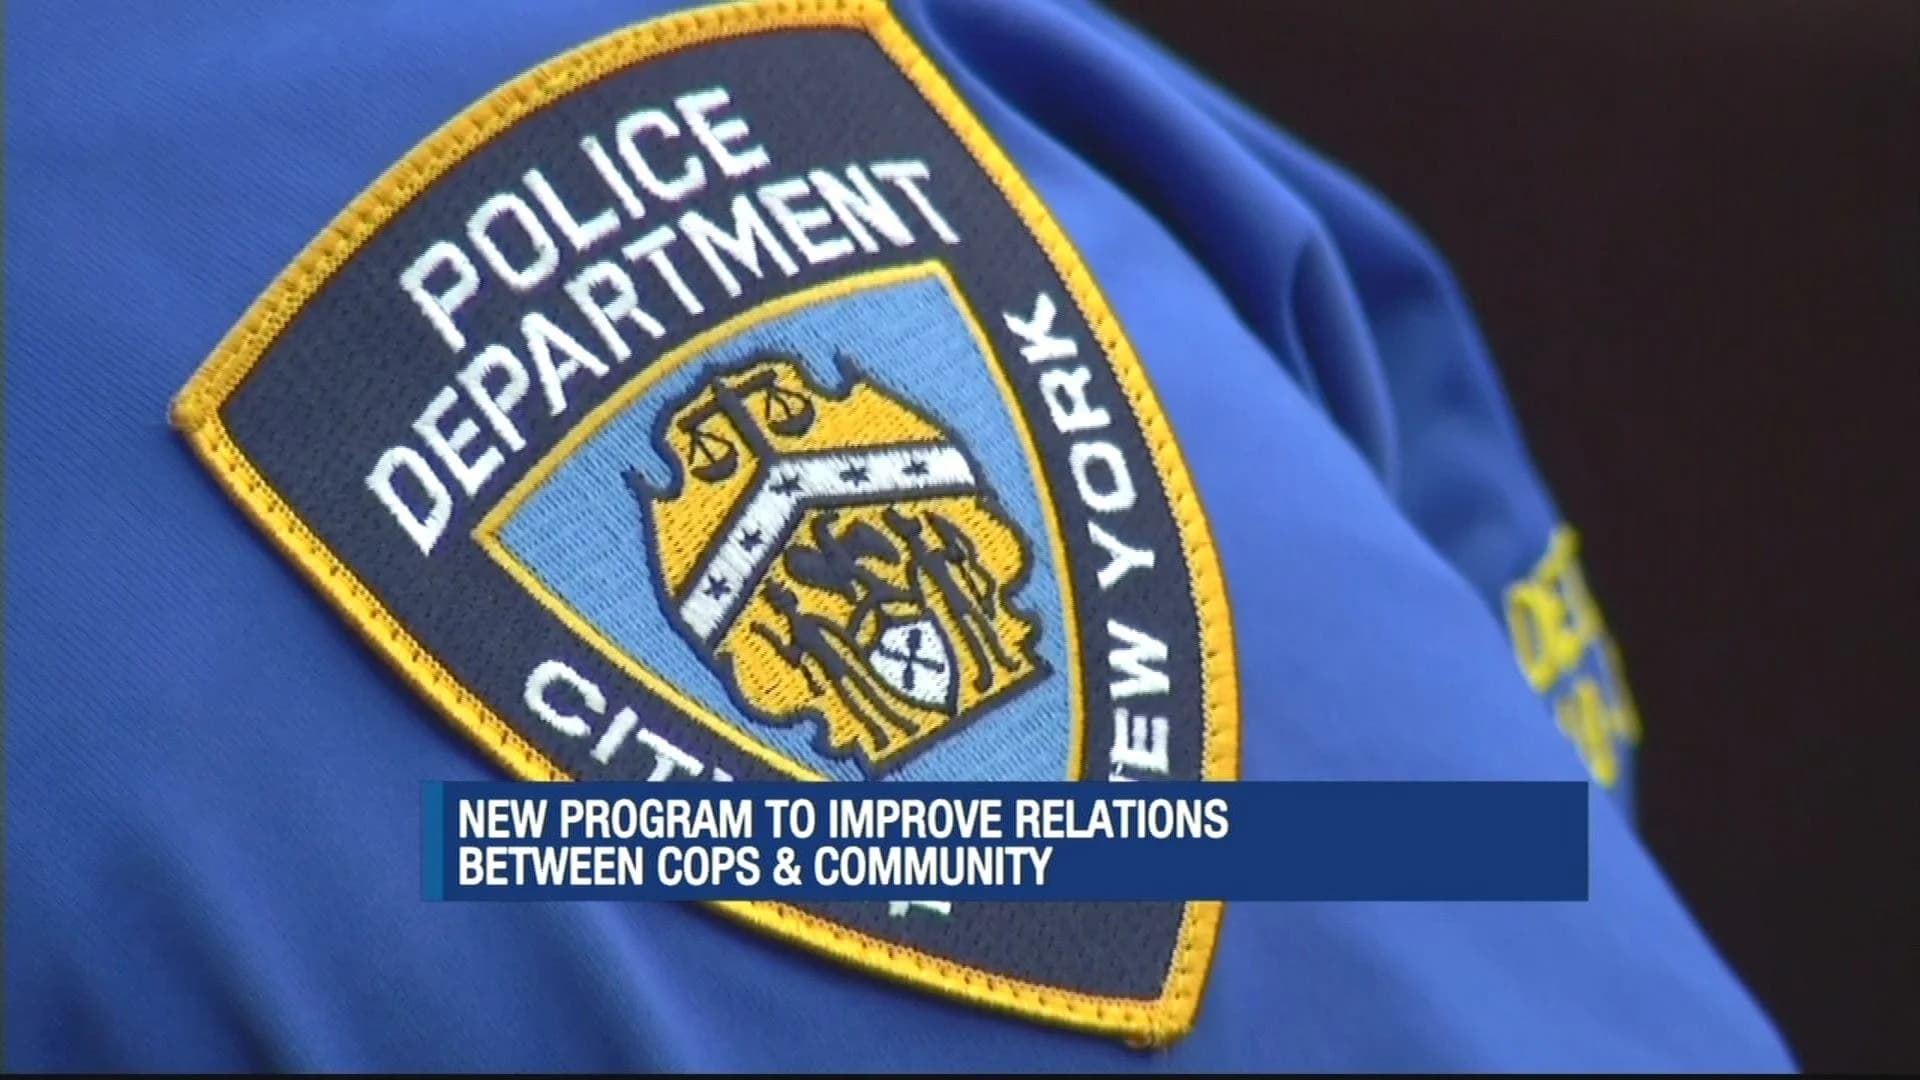 Event aims to strengthen police-community relations